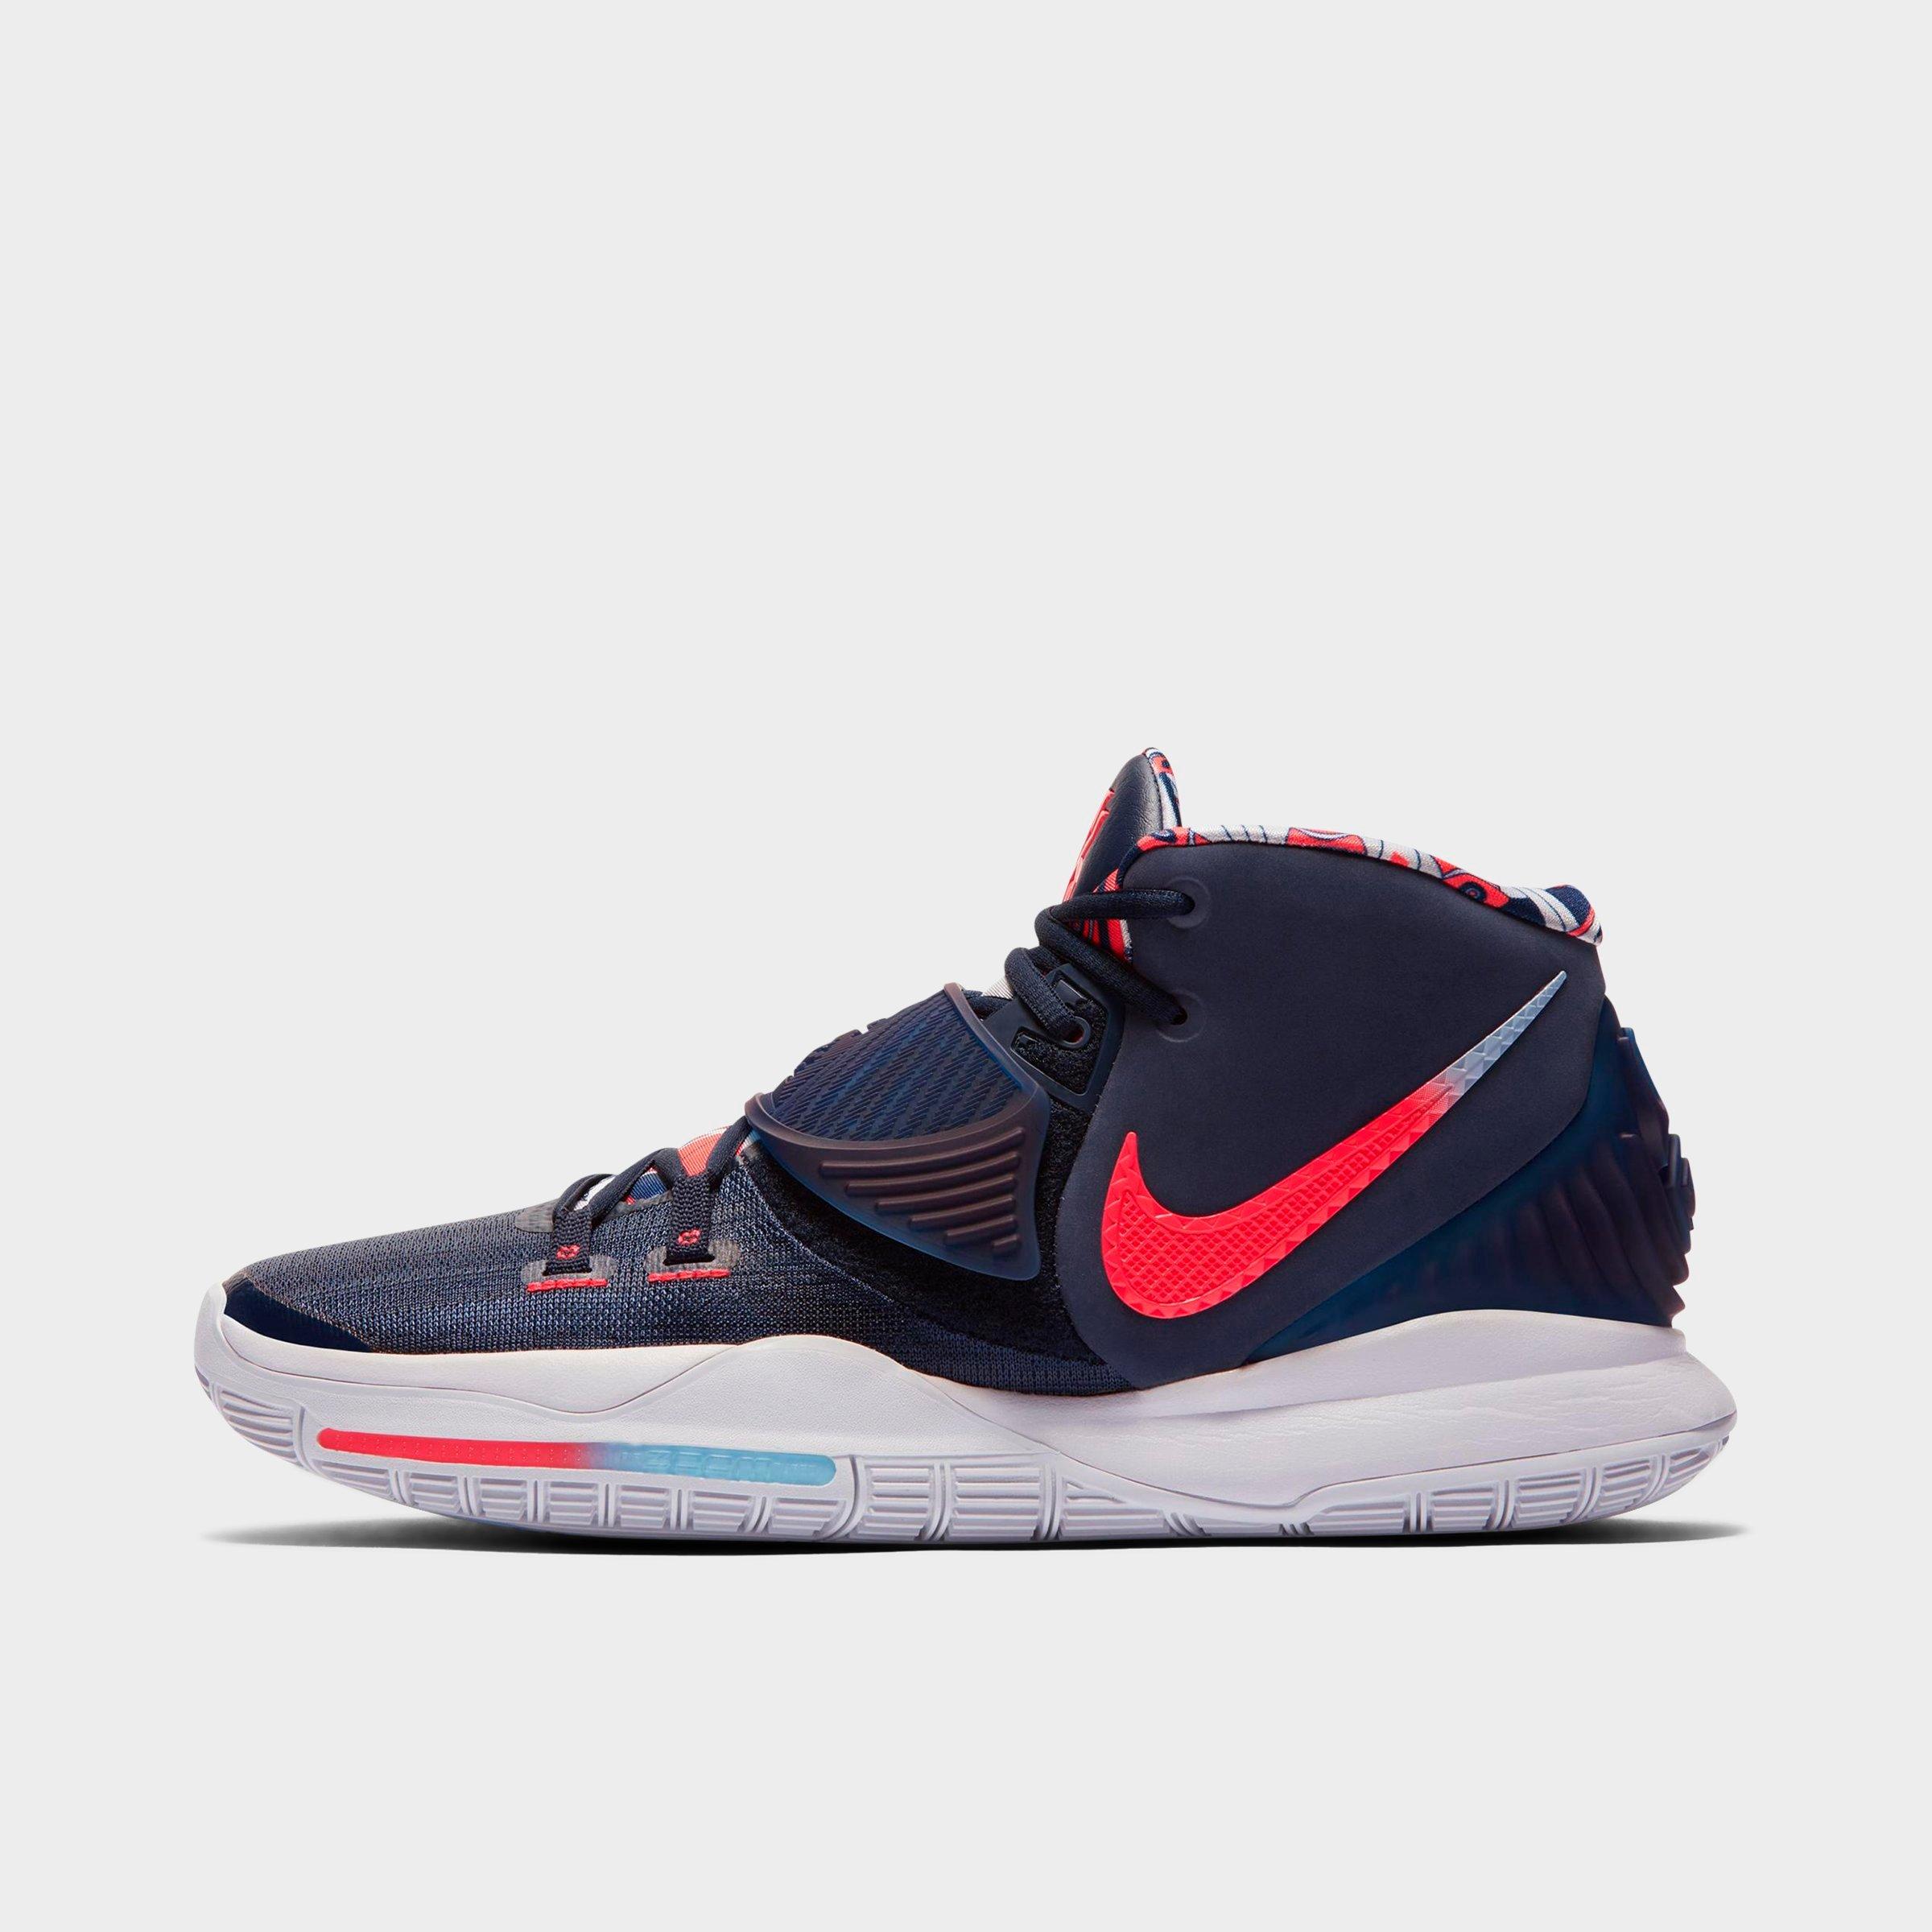 kyrie irving kid shoes